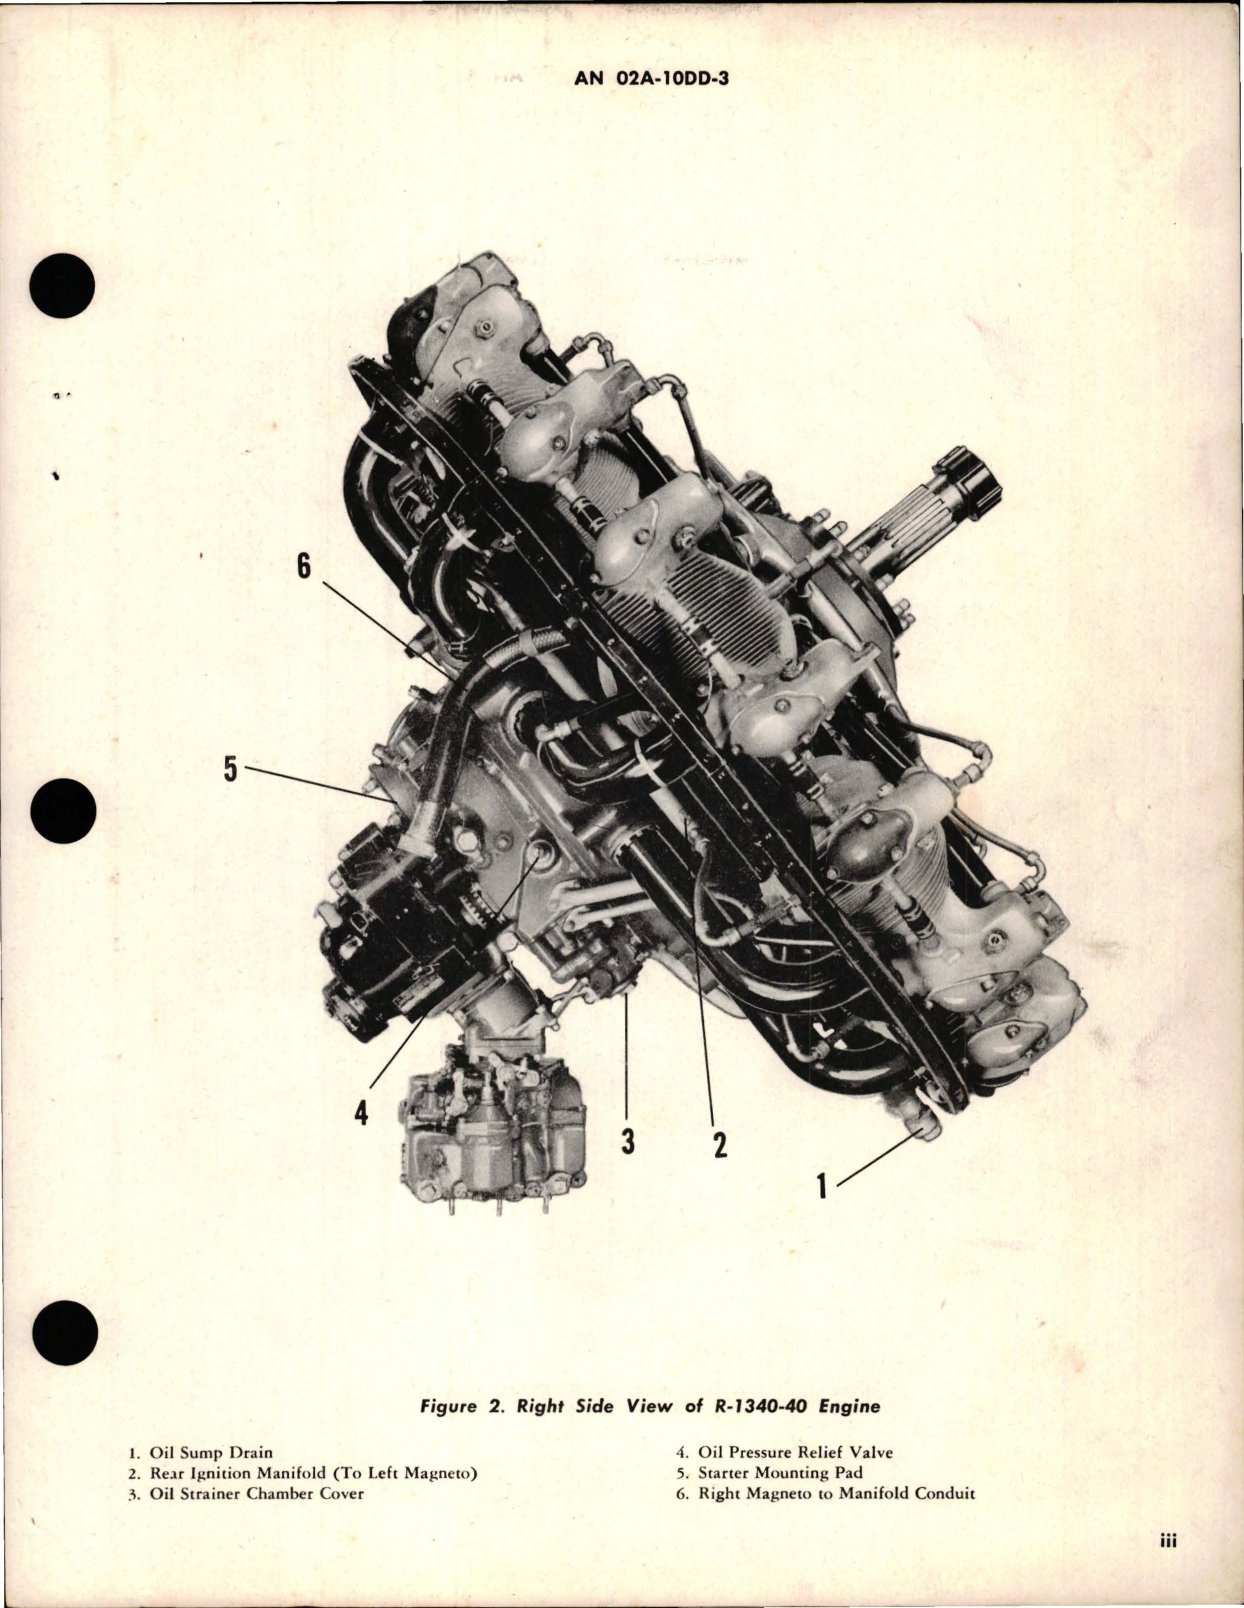 Sample page 5 from AirCorps Library document: Overhaul Instructions for R-1340-40 and R-1340-57 Engines